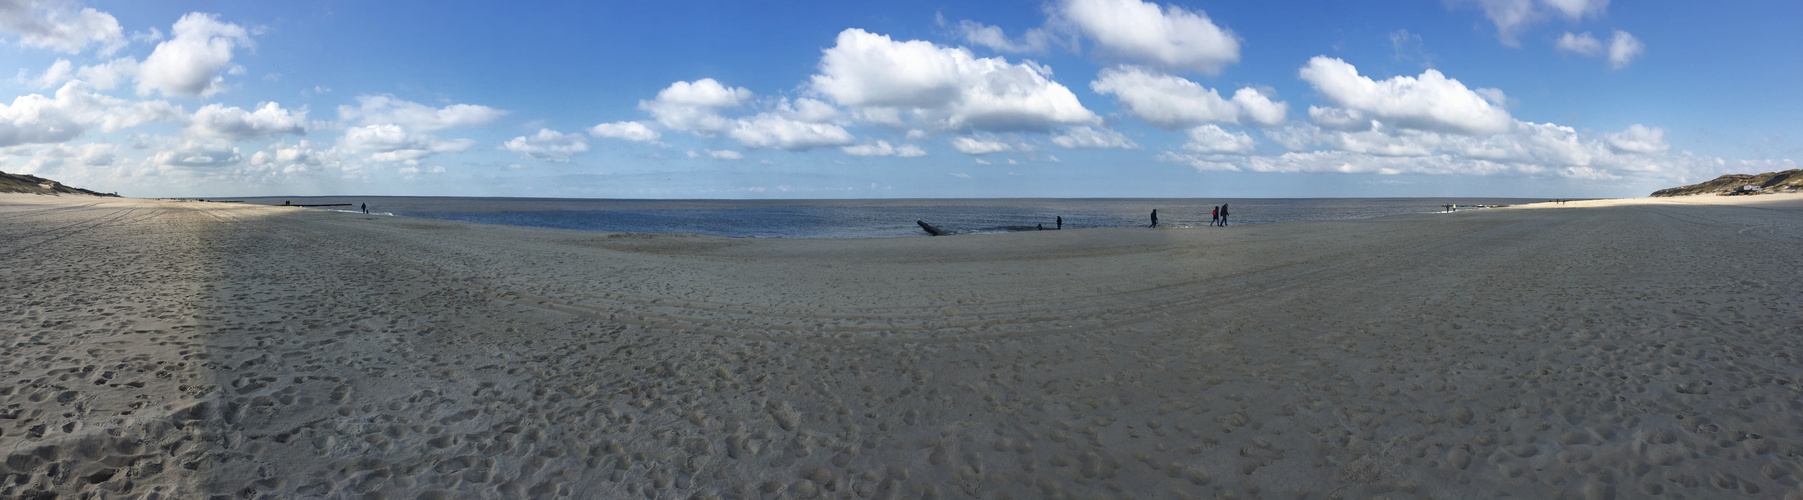 Anderes Panorama von Sylt